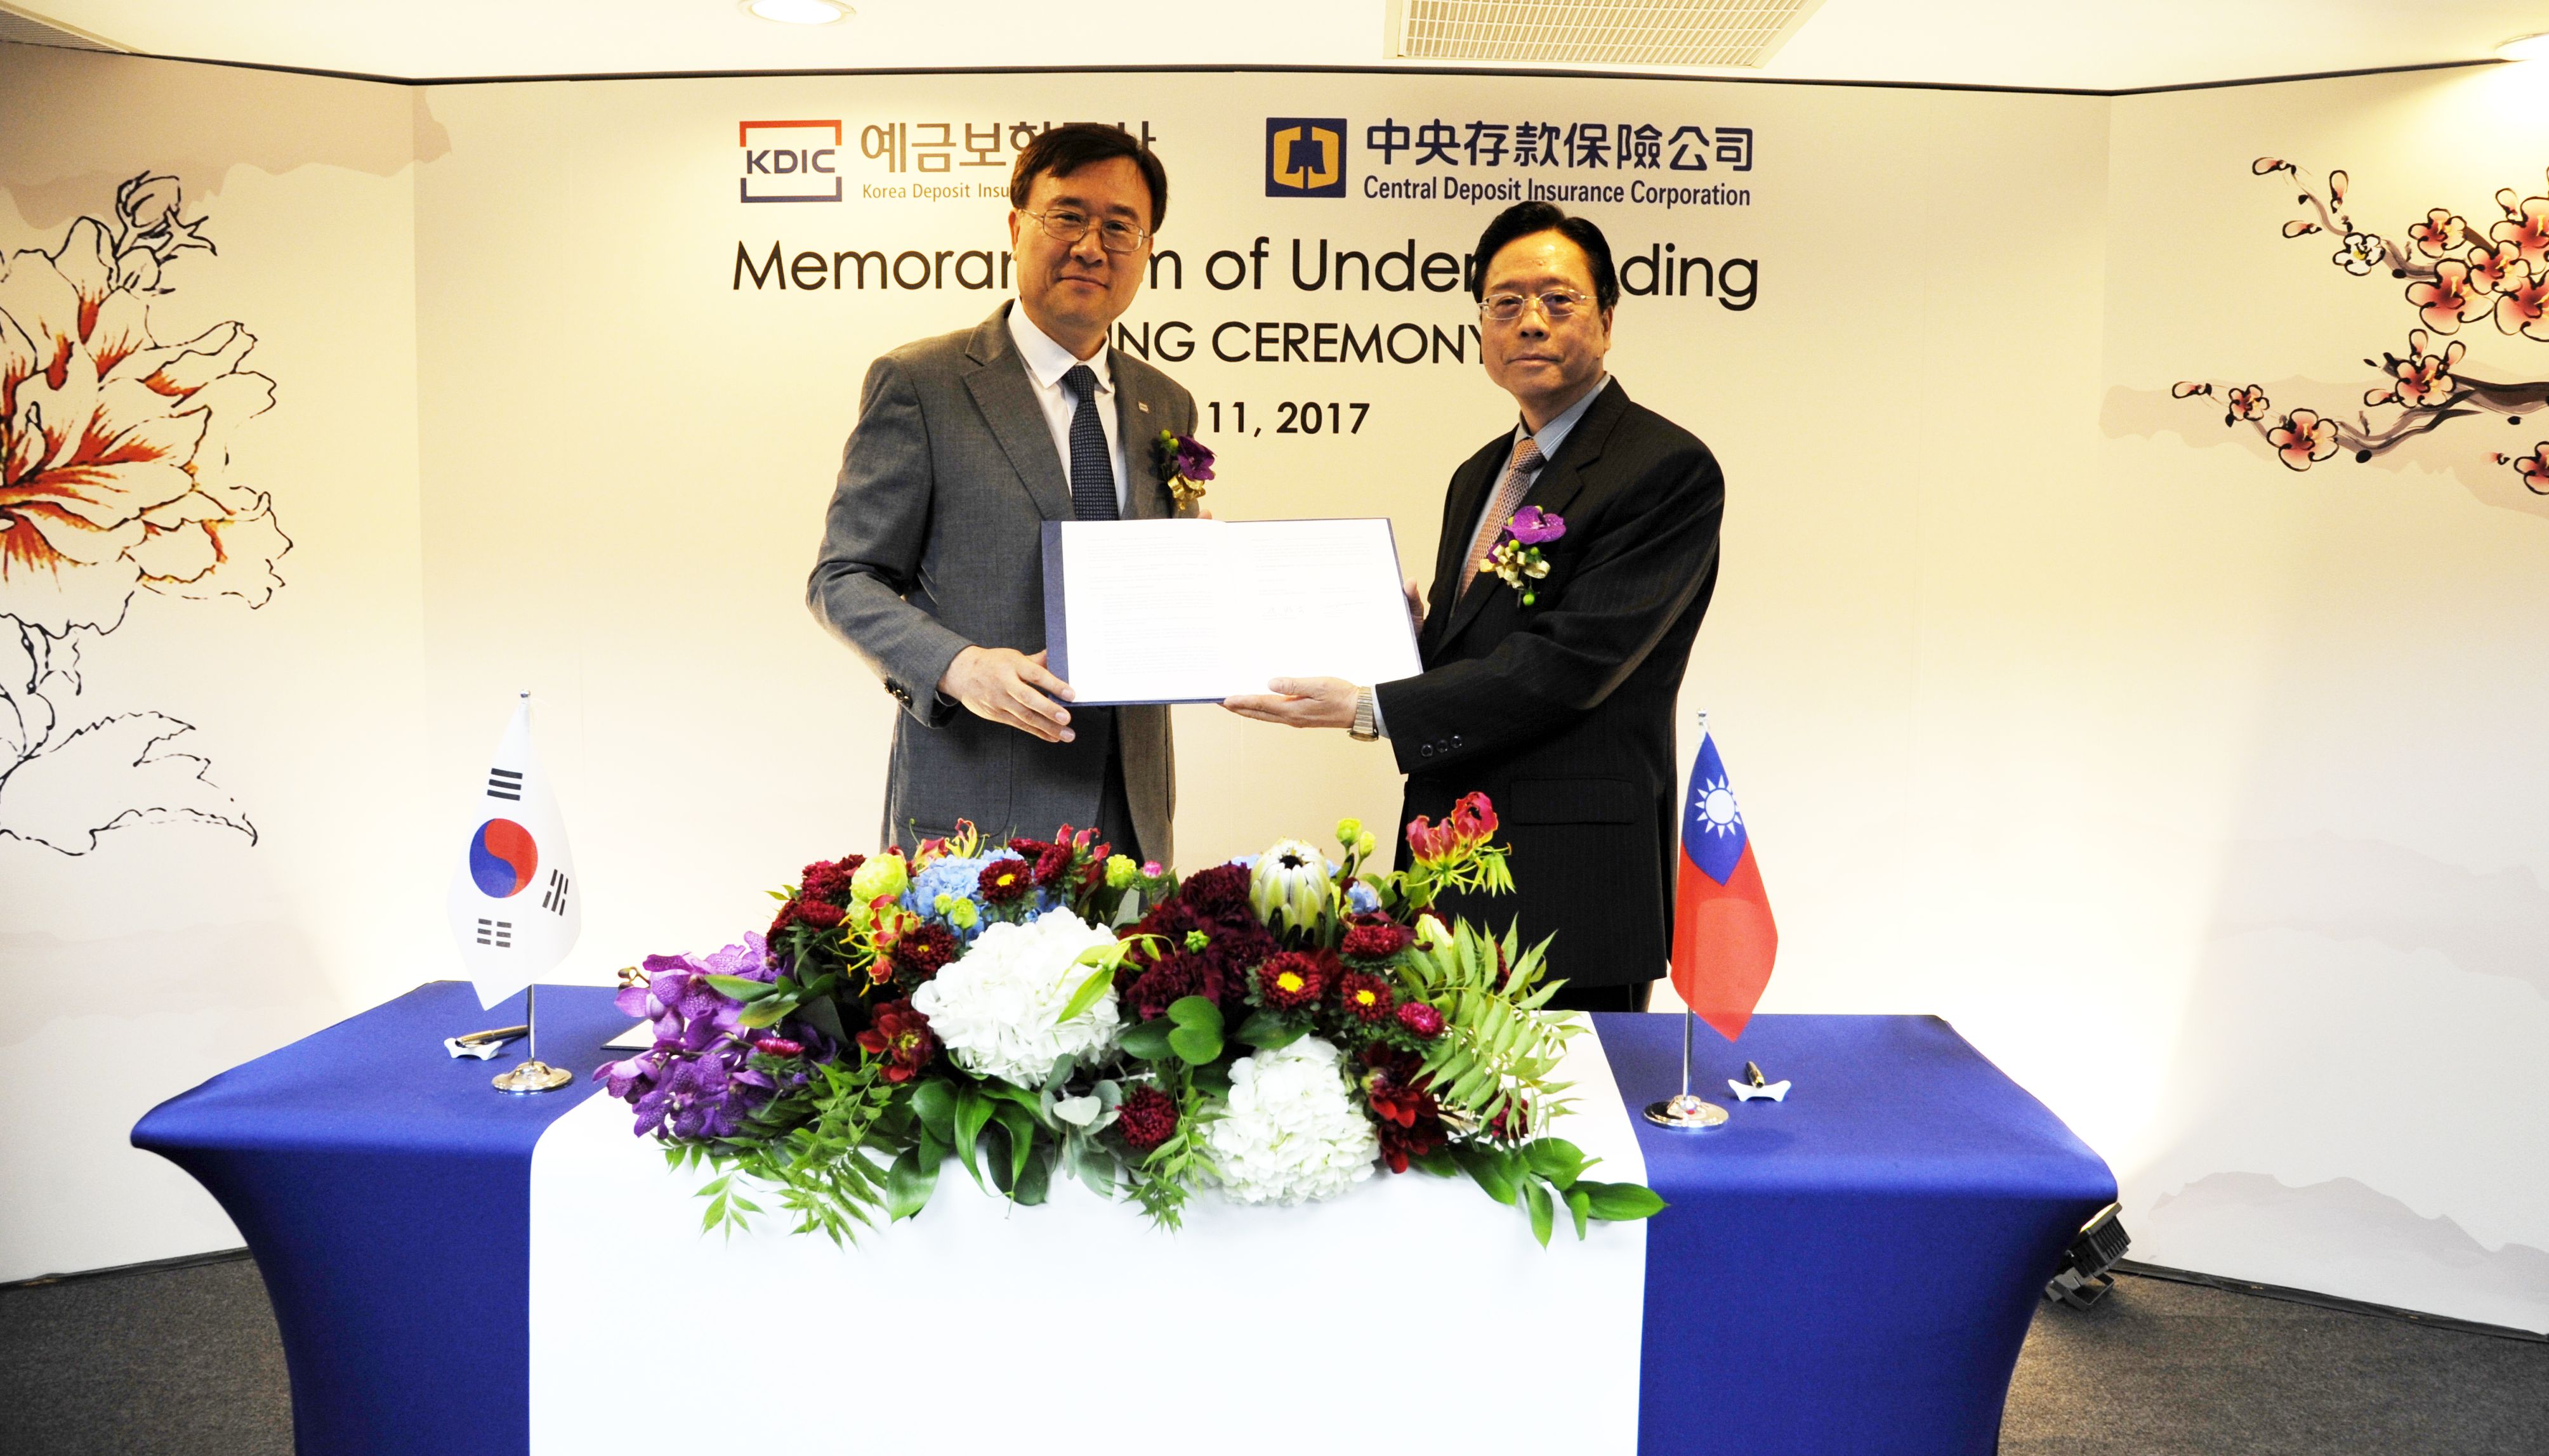 Photo of CDIC Chairman Dr. Paul C.D. Lei (right) and KDIC Chairman & President Dr. Bumgook Gwak (left) in the MOU signing ceremony on April 11, 2017